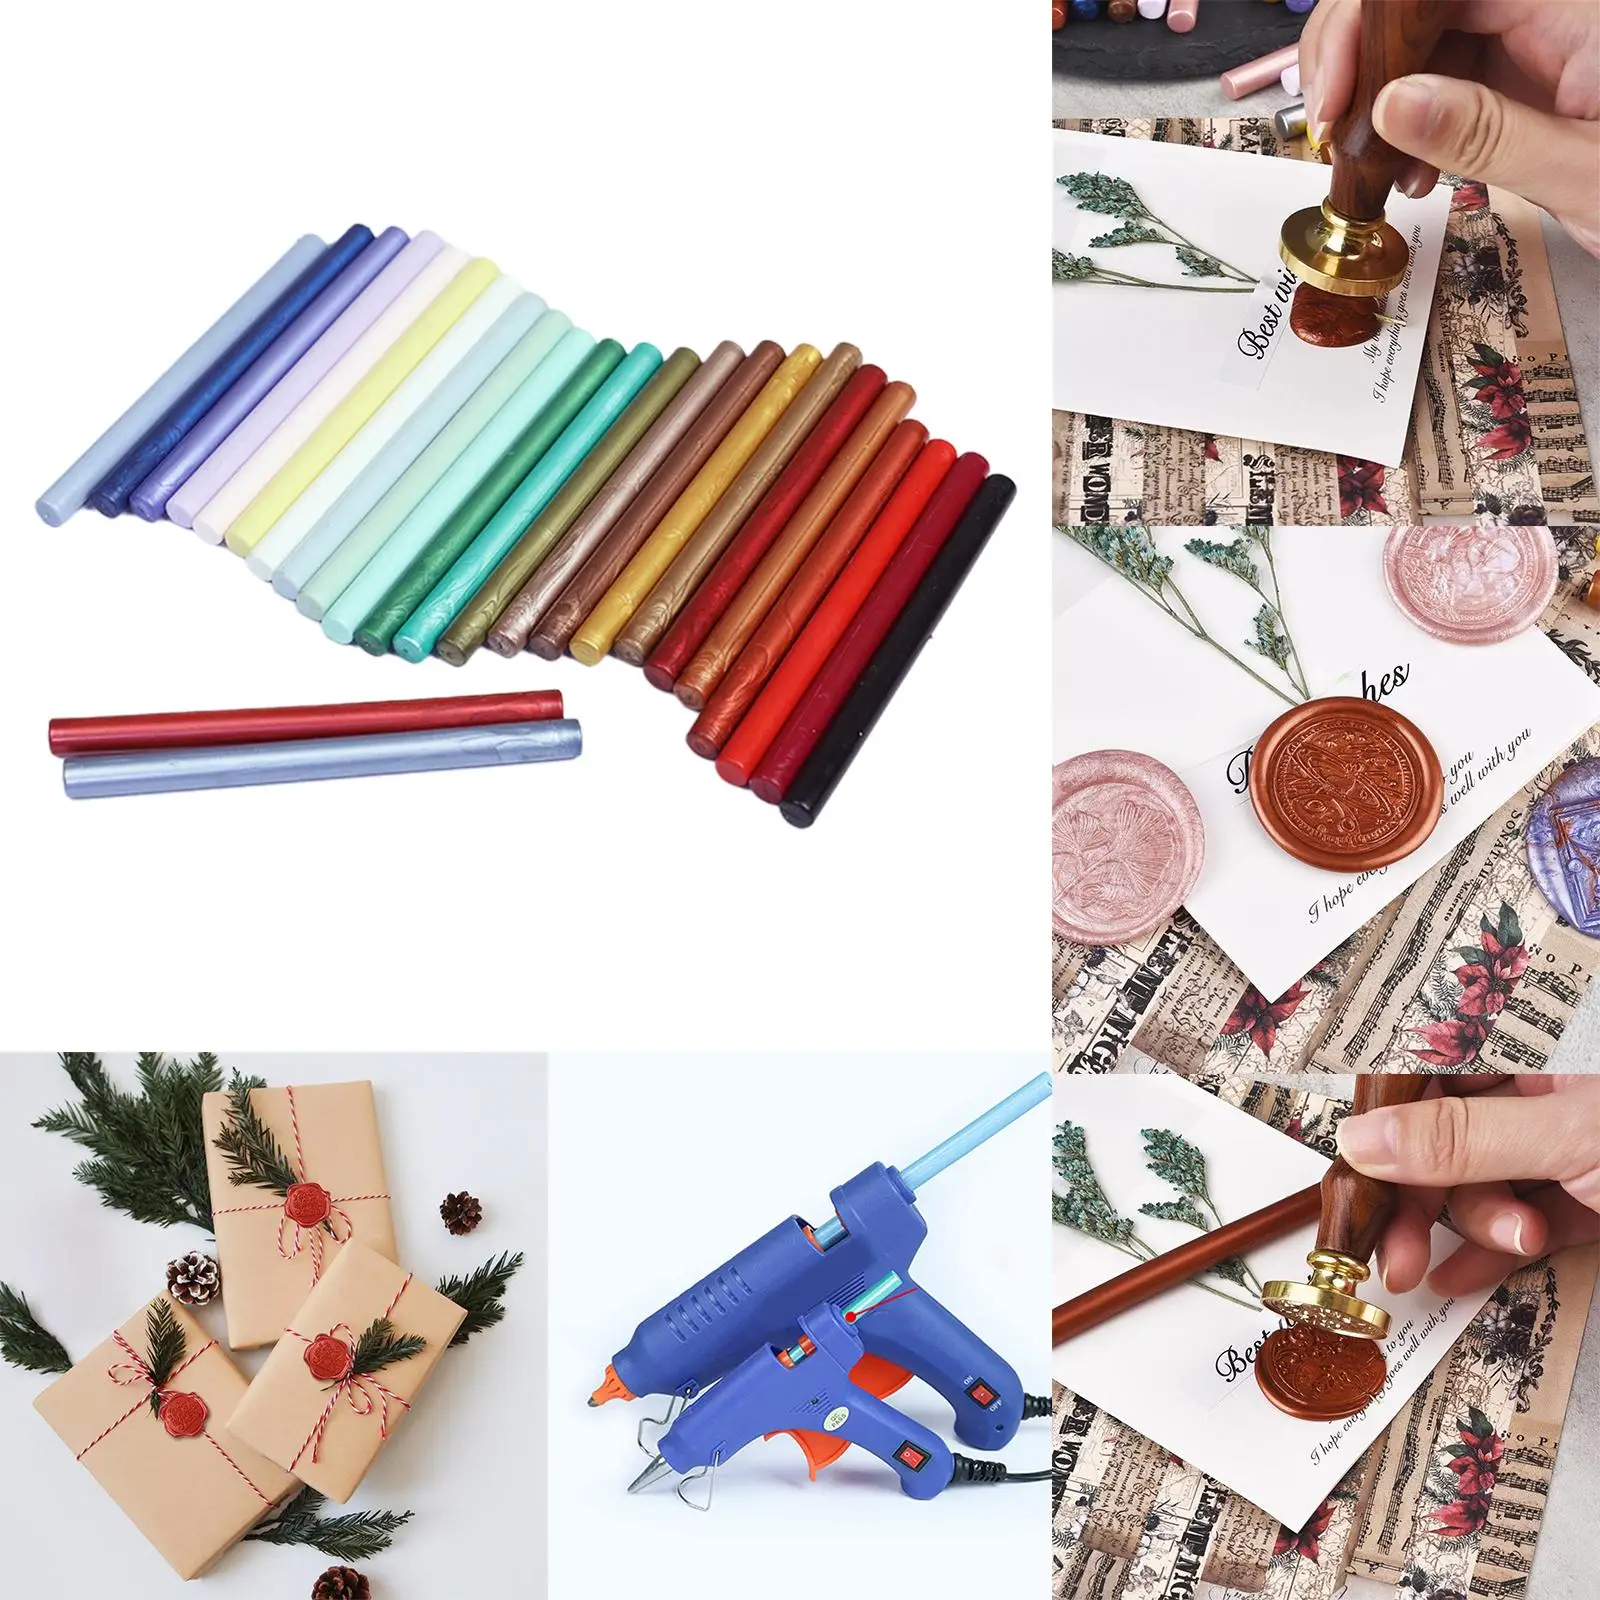 25x sealing wax Rods DIY Mixed Colors Melting Sealing Wax Rods for Cards Envelopes Packages Crafts Wedding Invitations